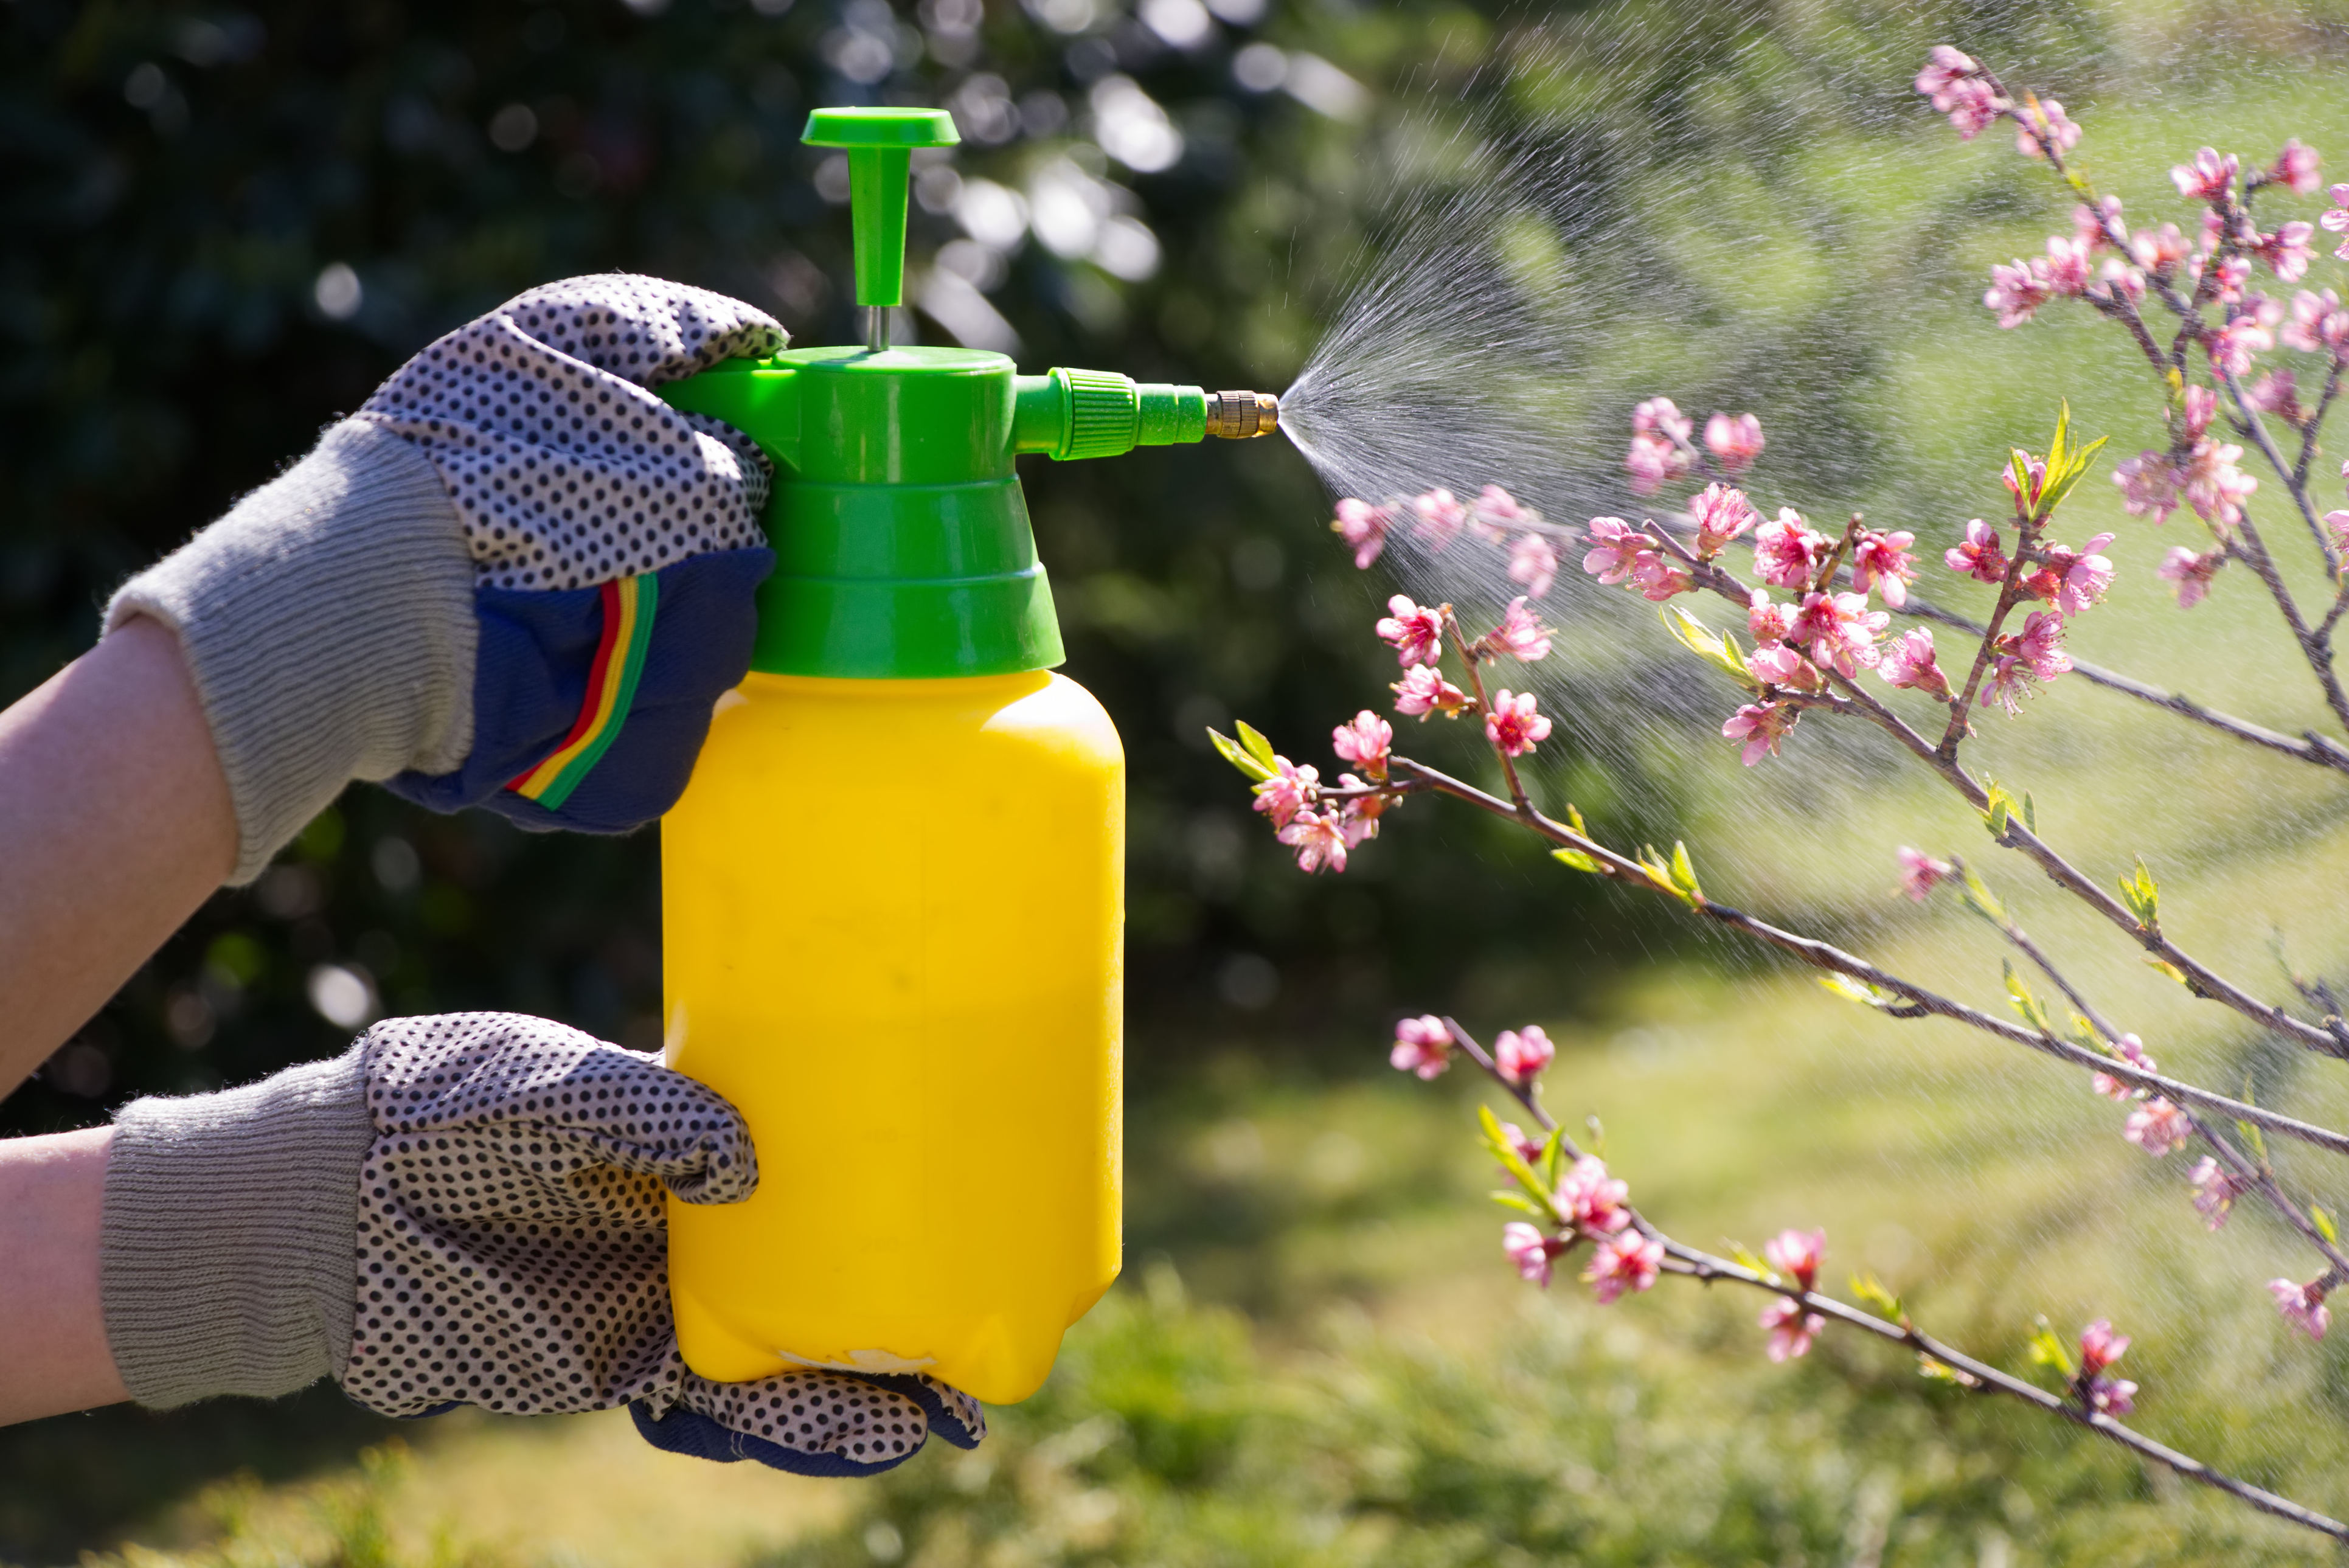 Don't kill pests with insecticides (Thinkstock/PA)